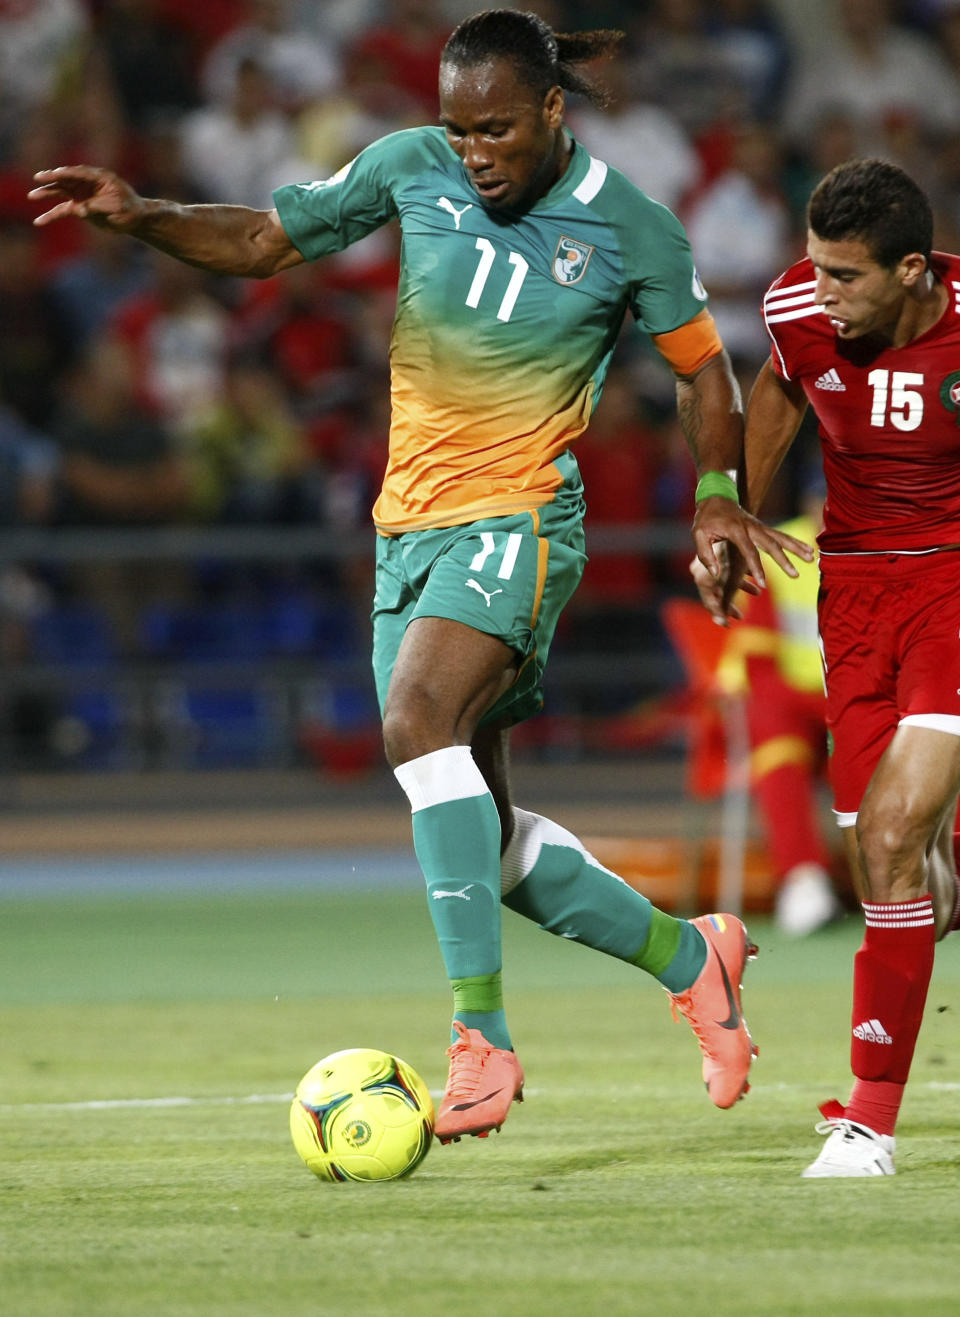 FILE - In this June 9, 2012, file photo, Ivory Coast's Didier Drogba, left, challenges for the ball with Morocco's Benlamalem Ismail, right, during their World Cup qualifying match between Ivory Coast and Morocco, in Marrakech, Morocco. Captain and national idol Didier Drogba remains at the center of the country's hopes despite turning 36 last month. (AP Photo/Abdeljalil Bounhar, File)